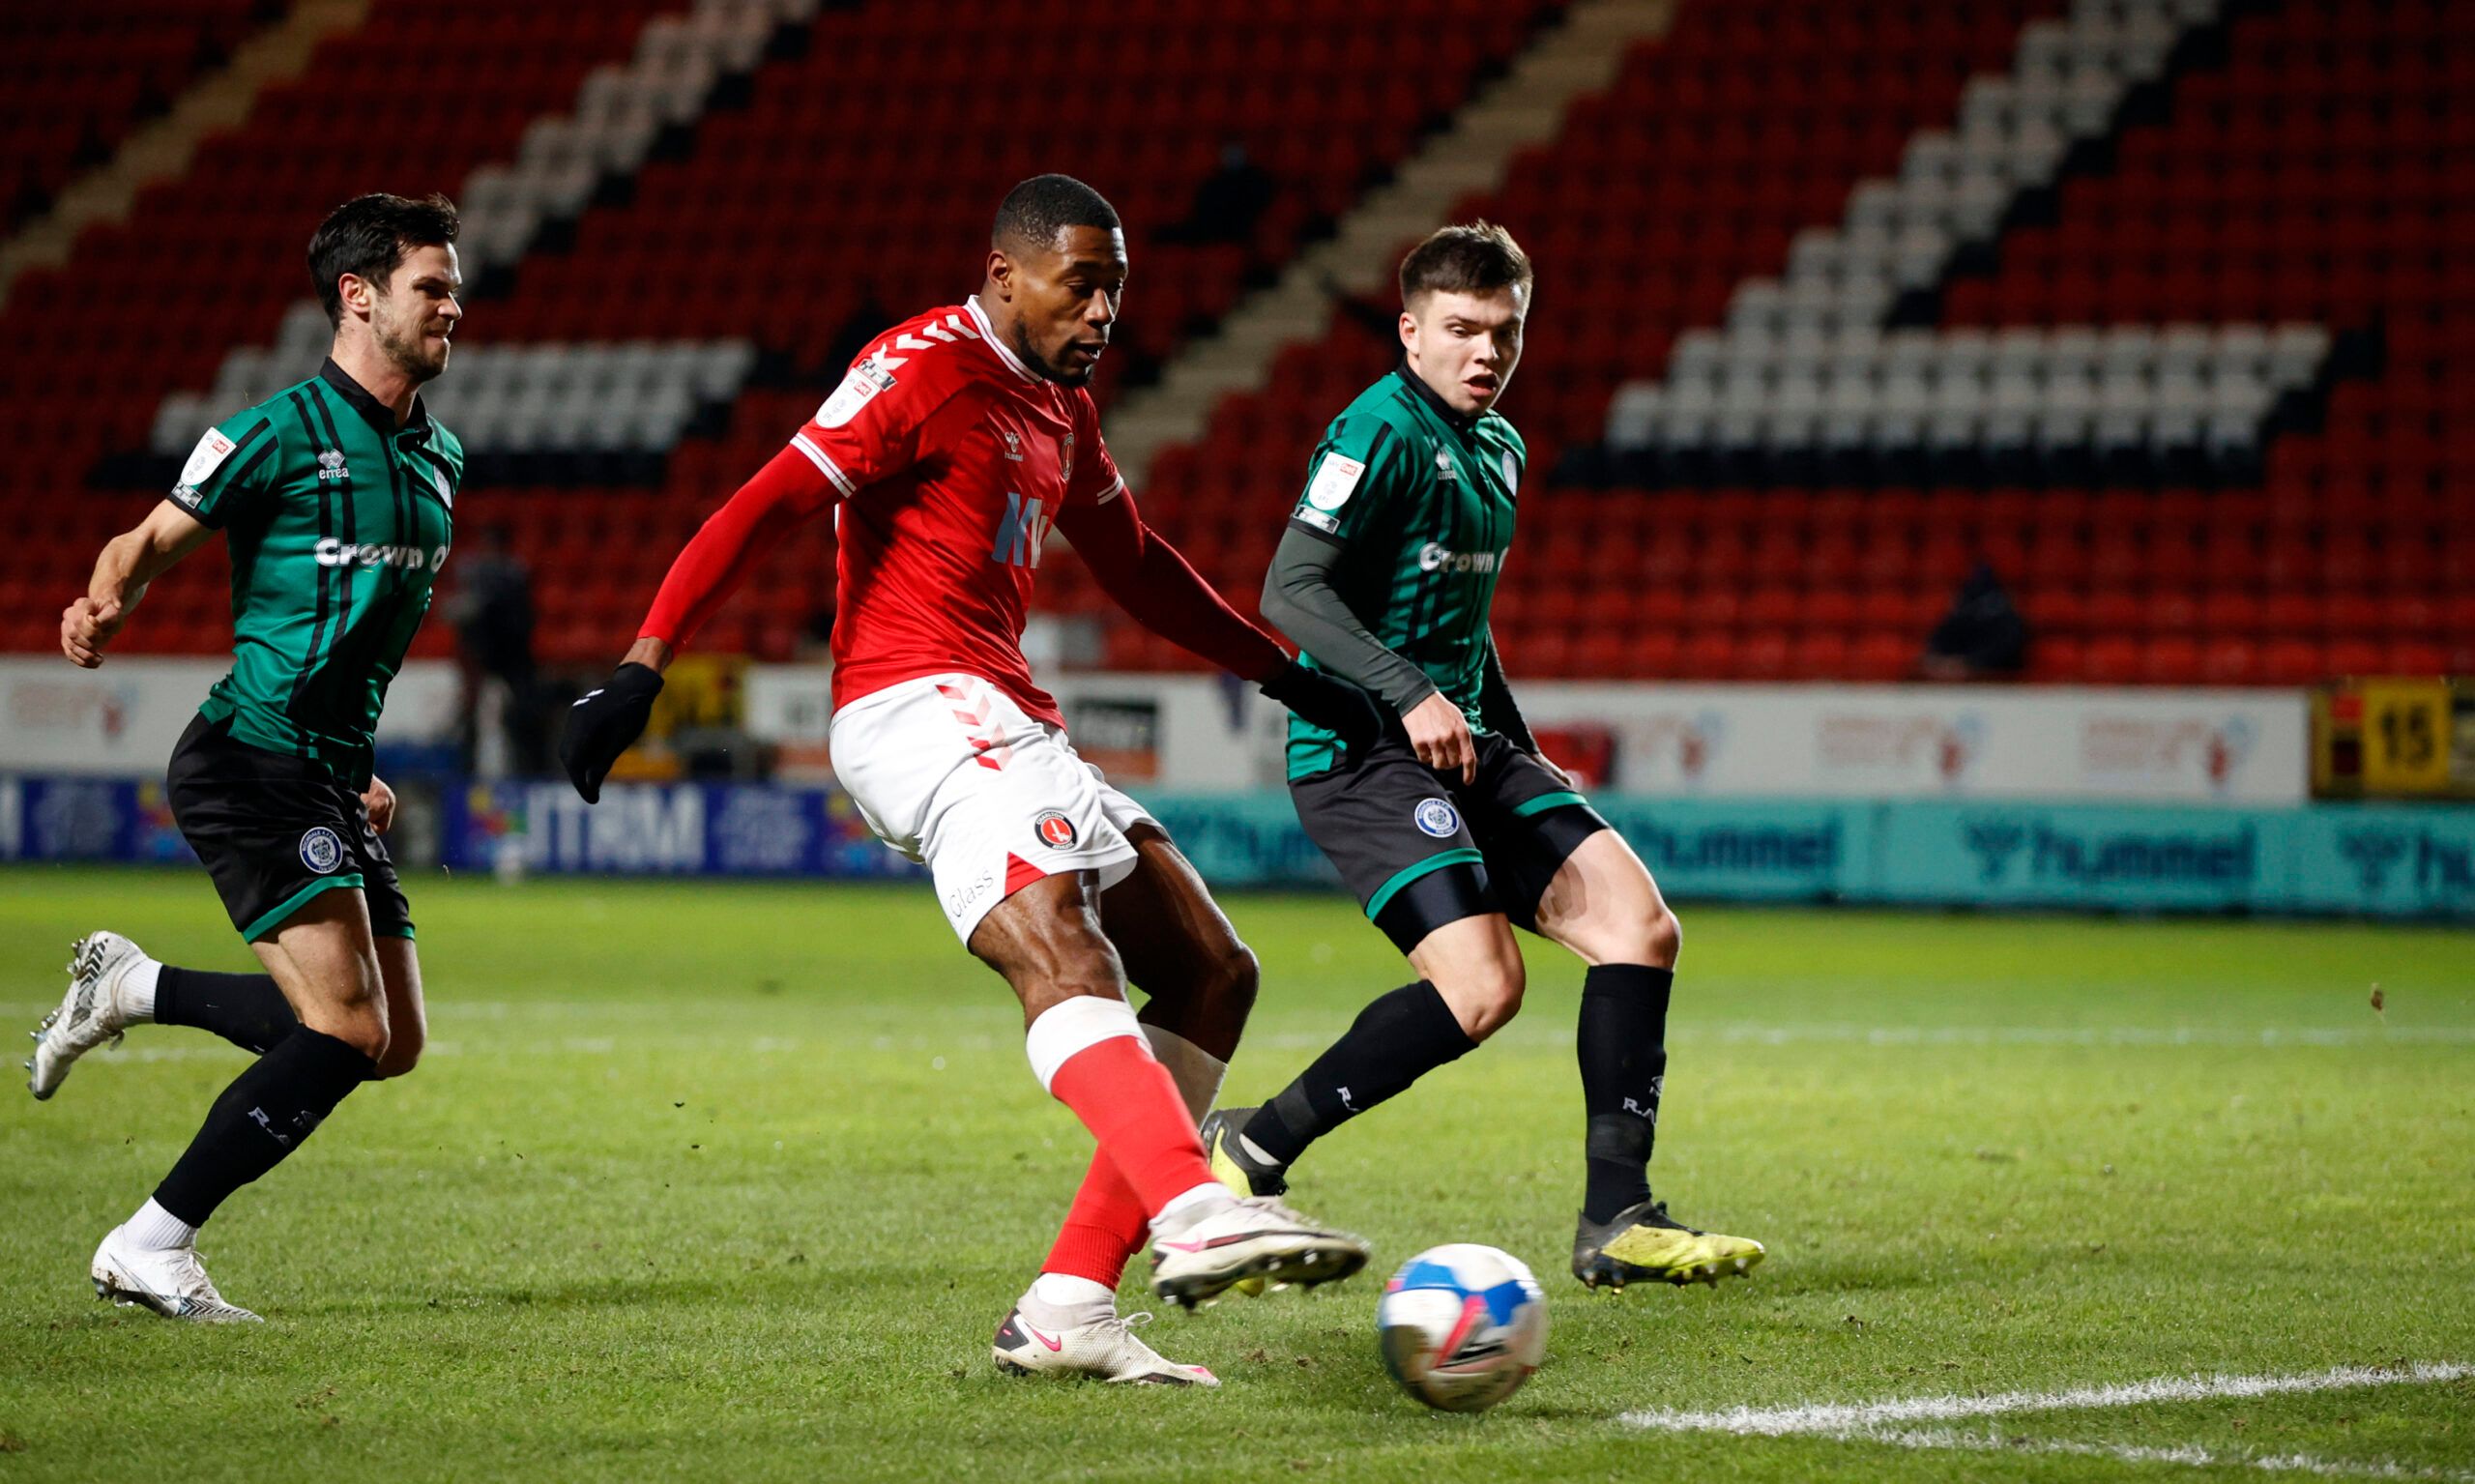 Soccer Football - League One - Charlton Athletic v Rochdale - The Valley, London, Britain - January 12, 2021 Charlton Athletic’s Chuks Aneke scores their first goal Action Images/John Sibley